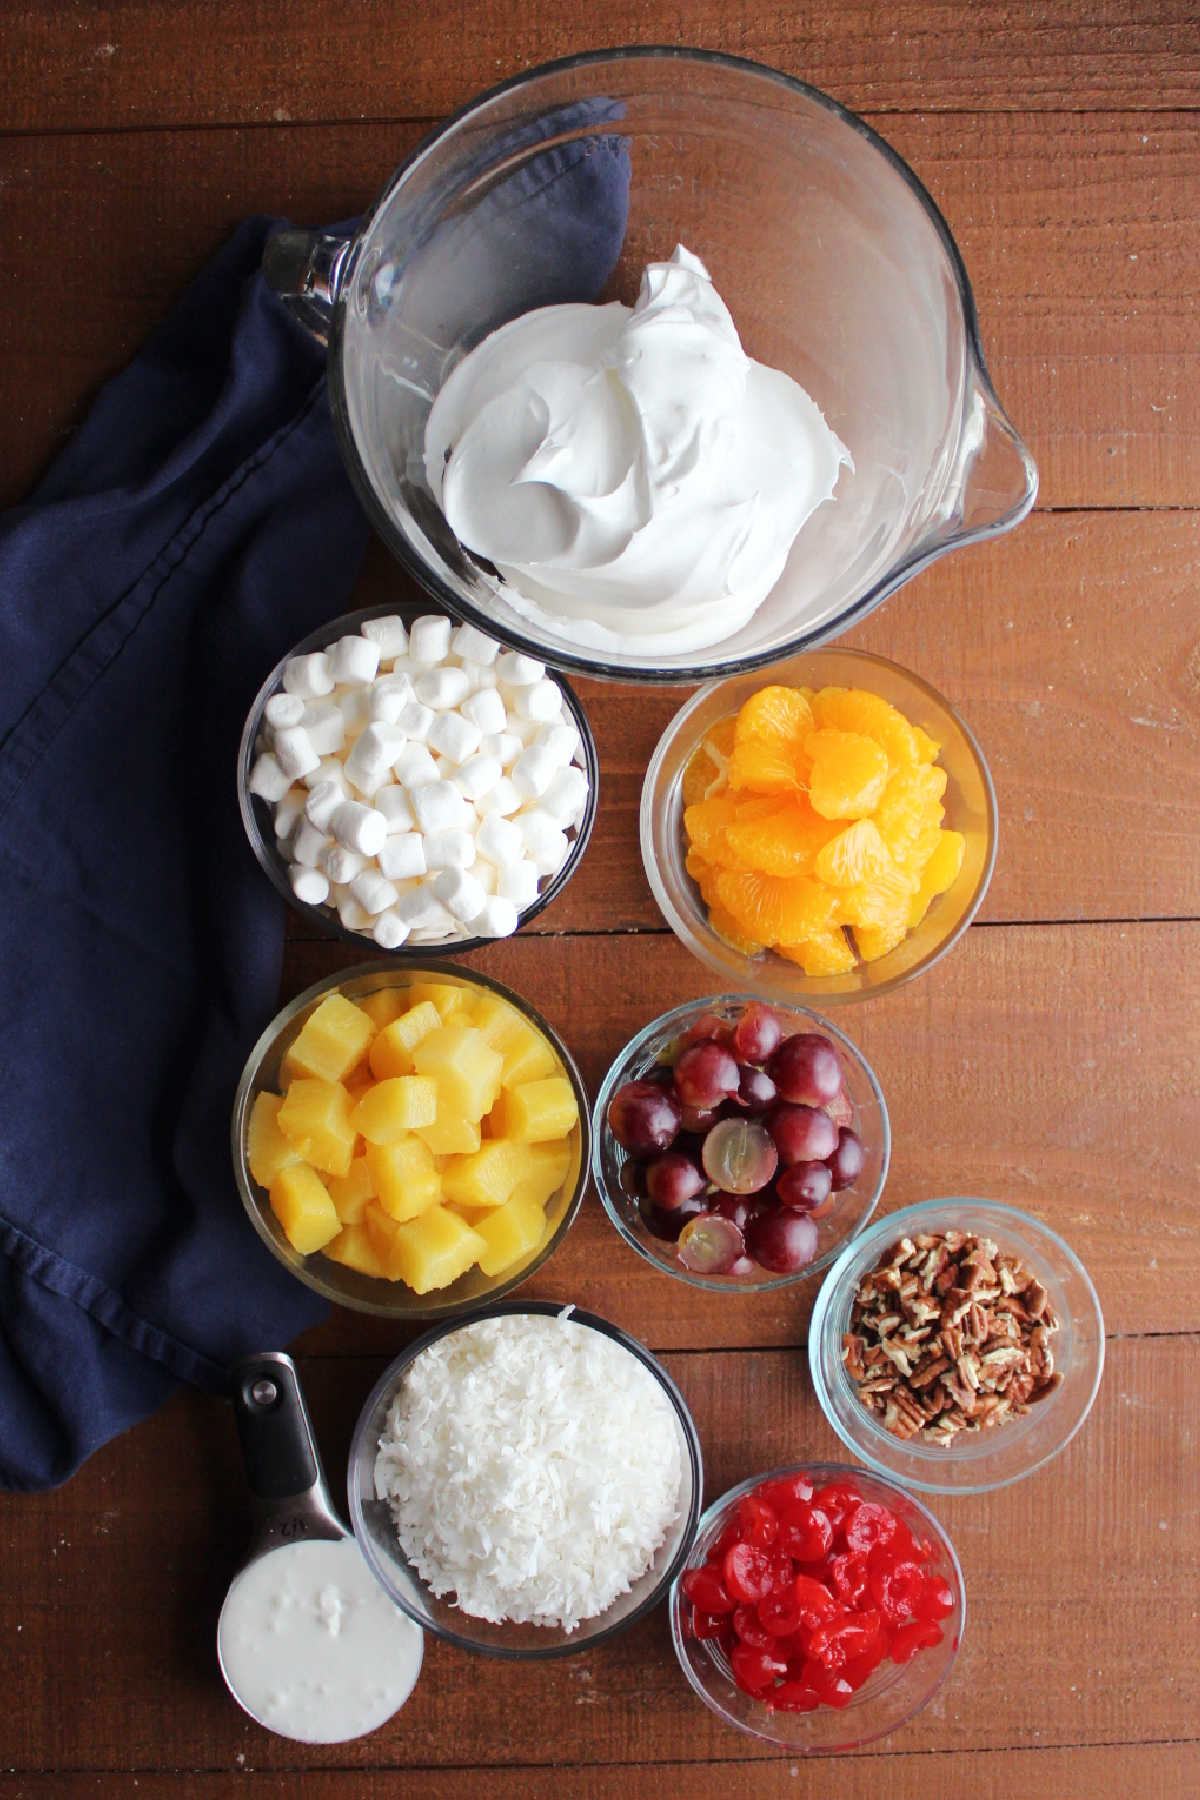 Ingredients including pineapple, oranges, grapes, cherries, pecans, coconut, sour cream, marshmallows, and whipped topping ready to be made into ambrosia. 